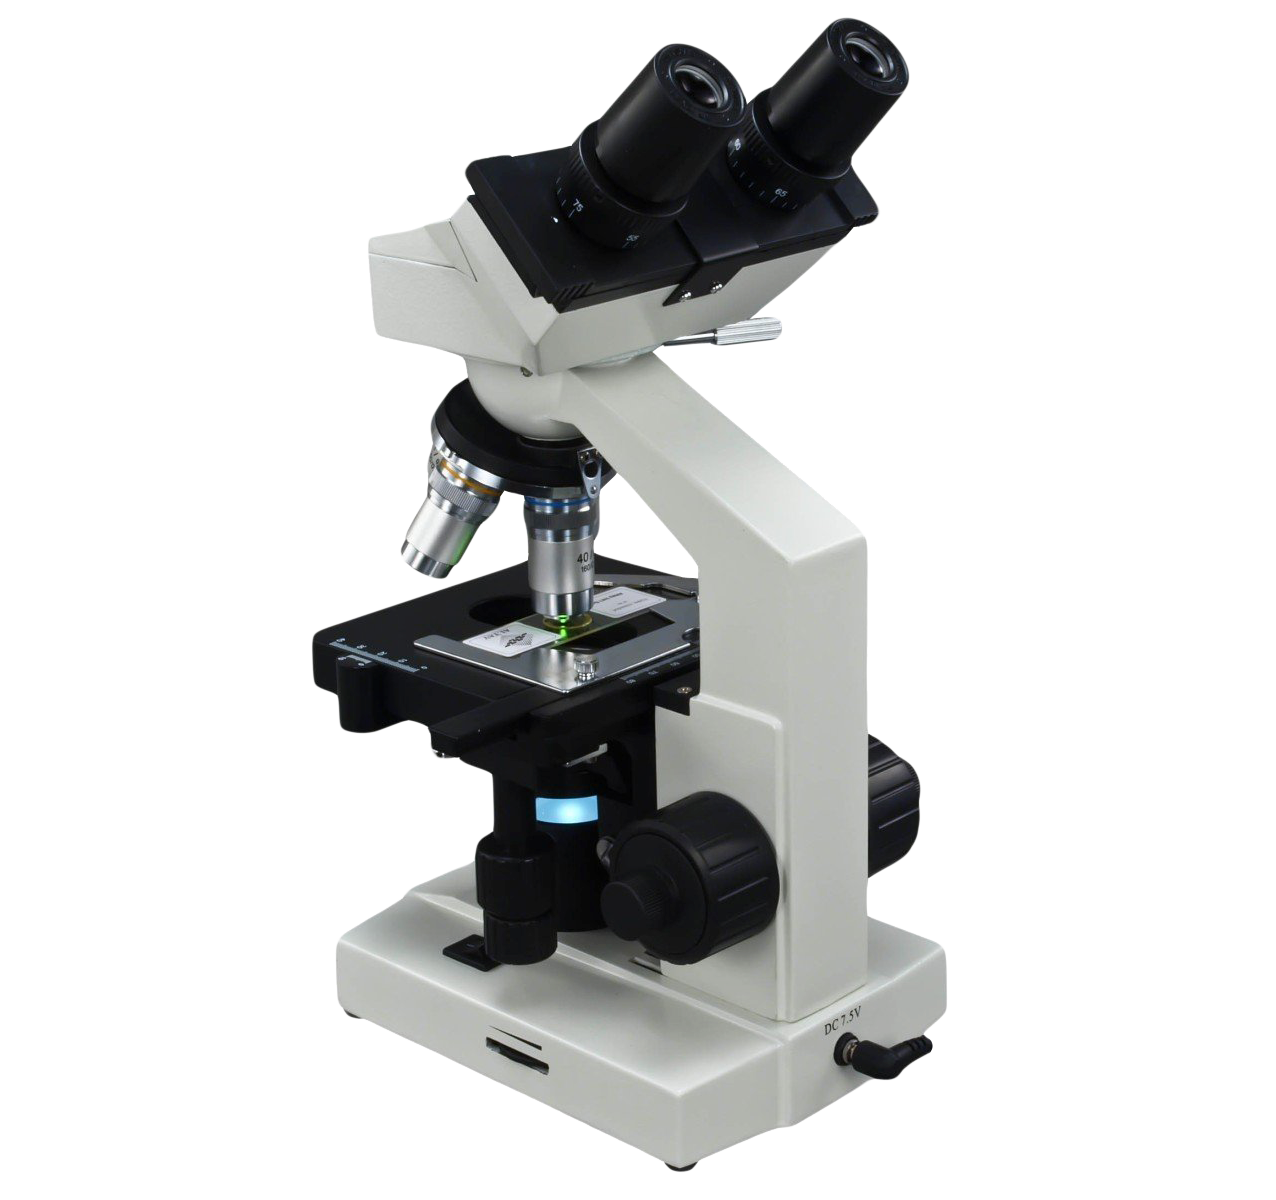 Microscope Png - Microscope, Transparent background PNG HD thumbnail